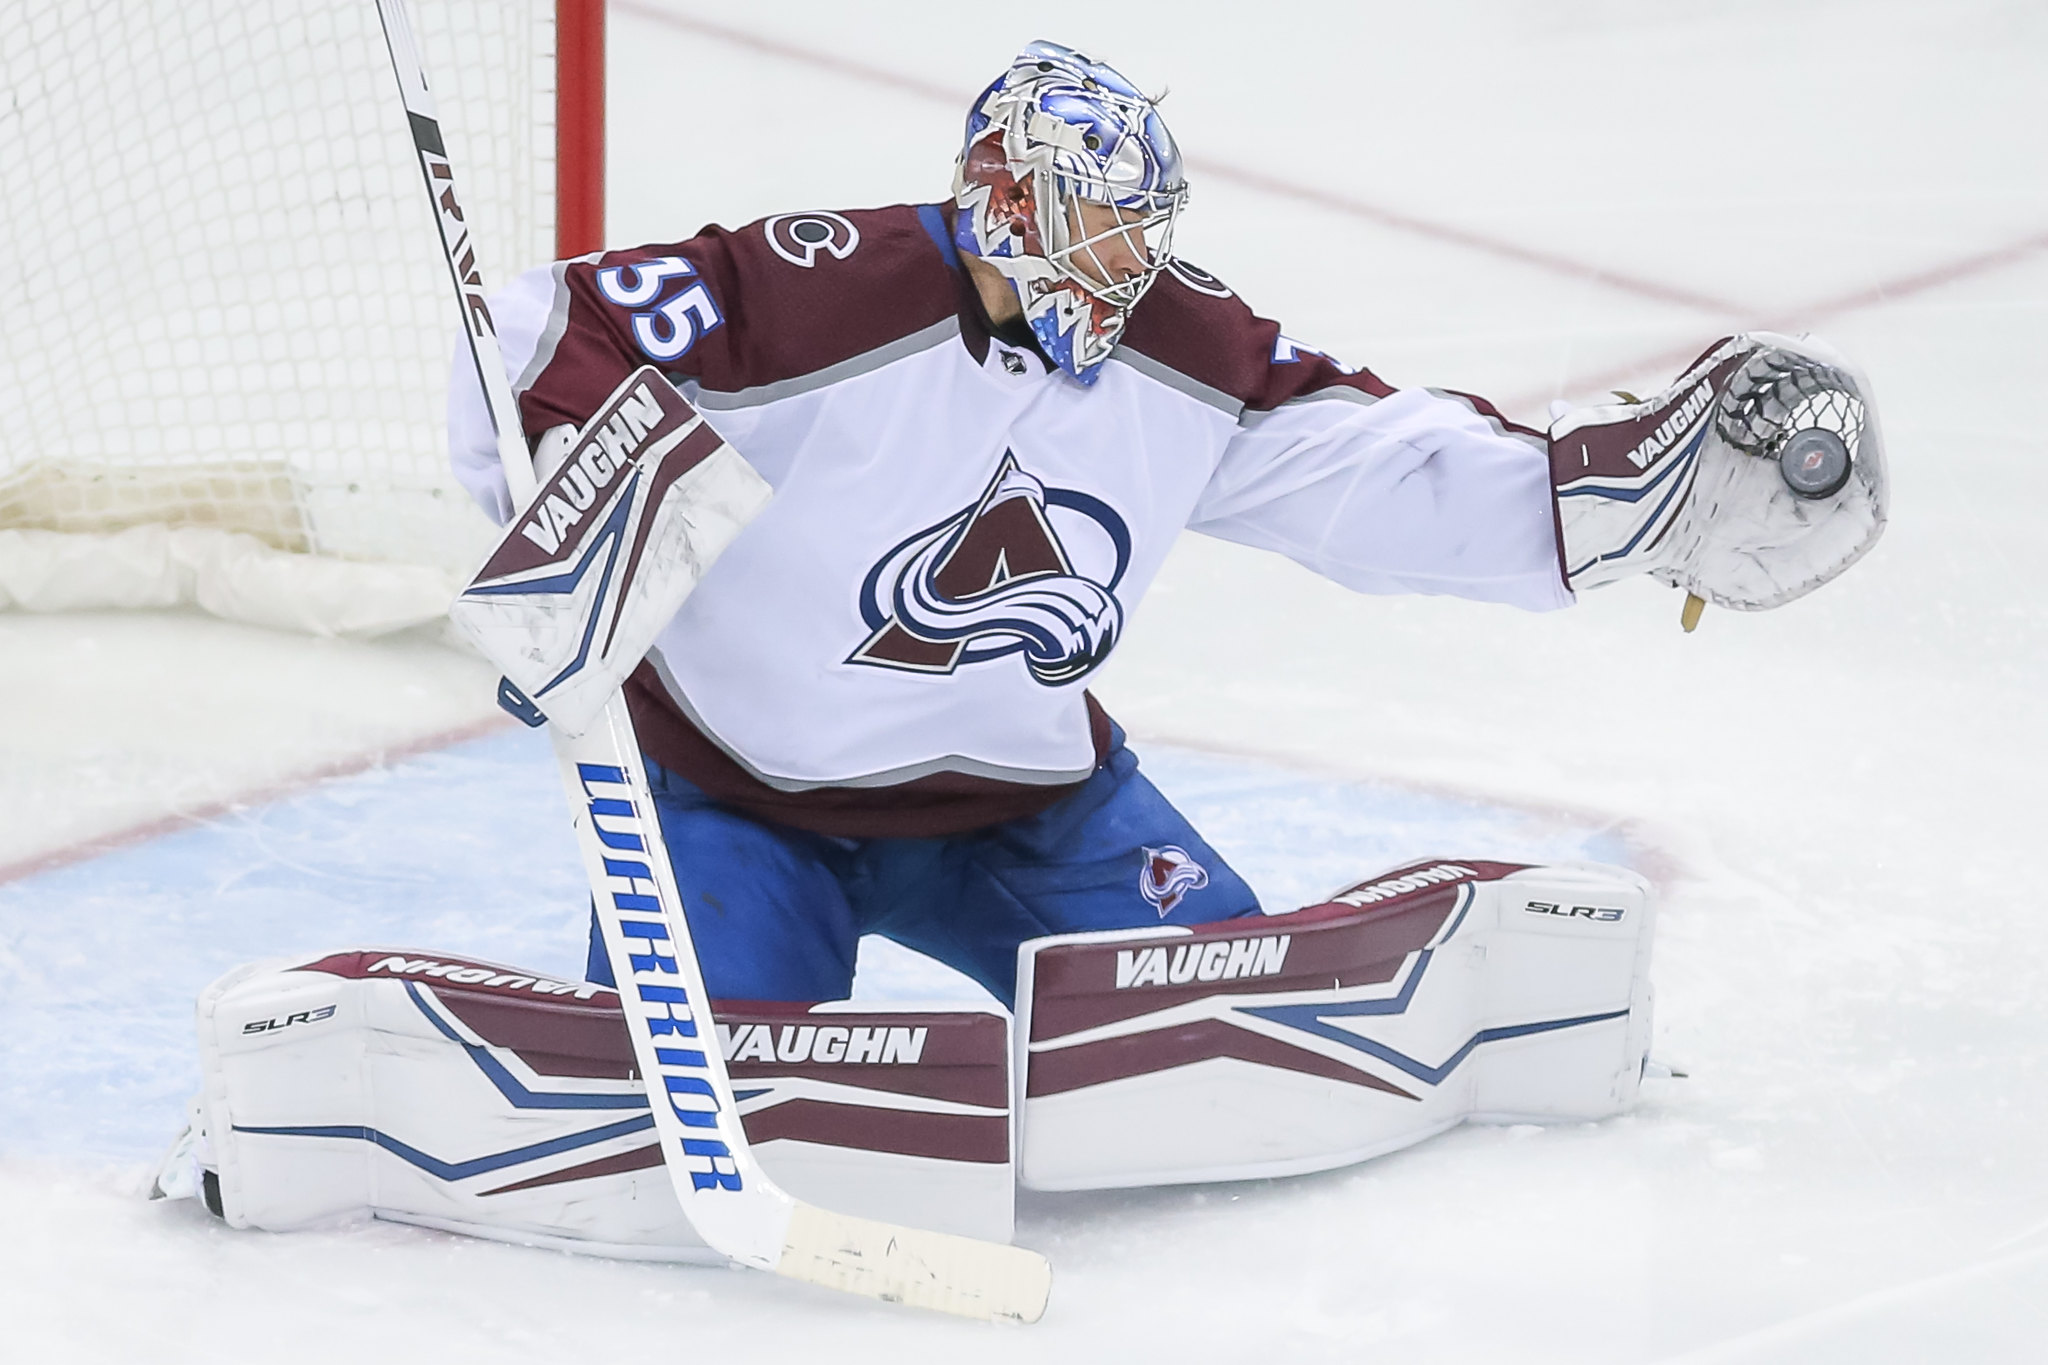 Free agent goalies: Campbell to Oilers, Capitals get Kuemper, more - NBC  Sports